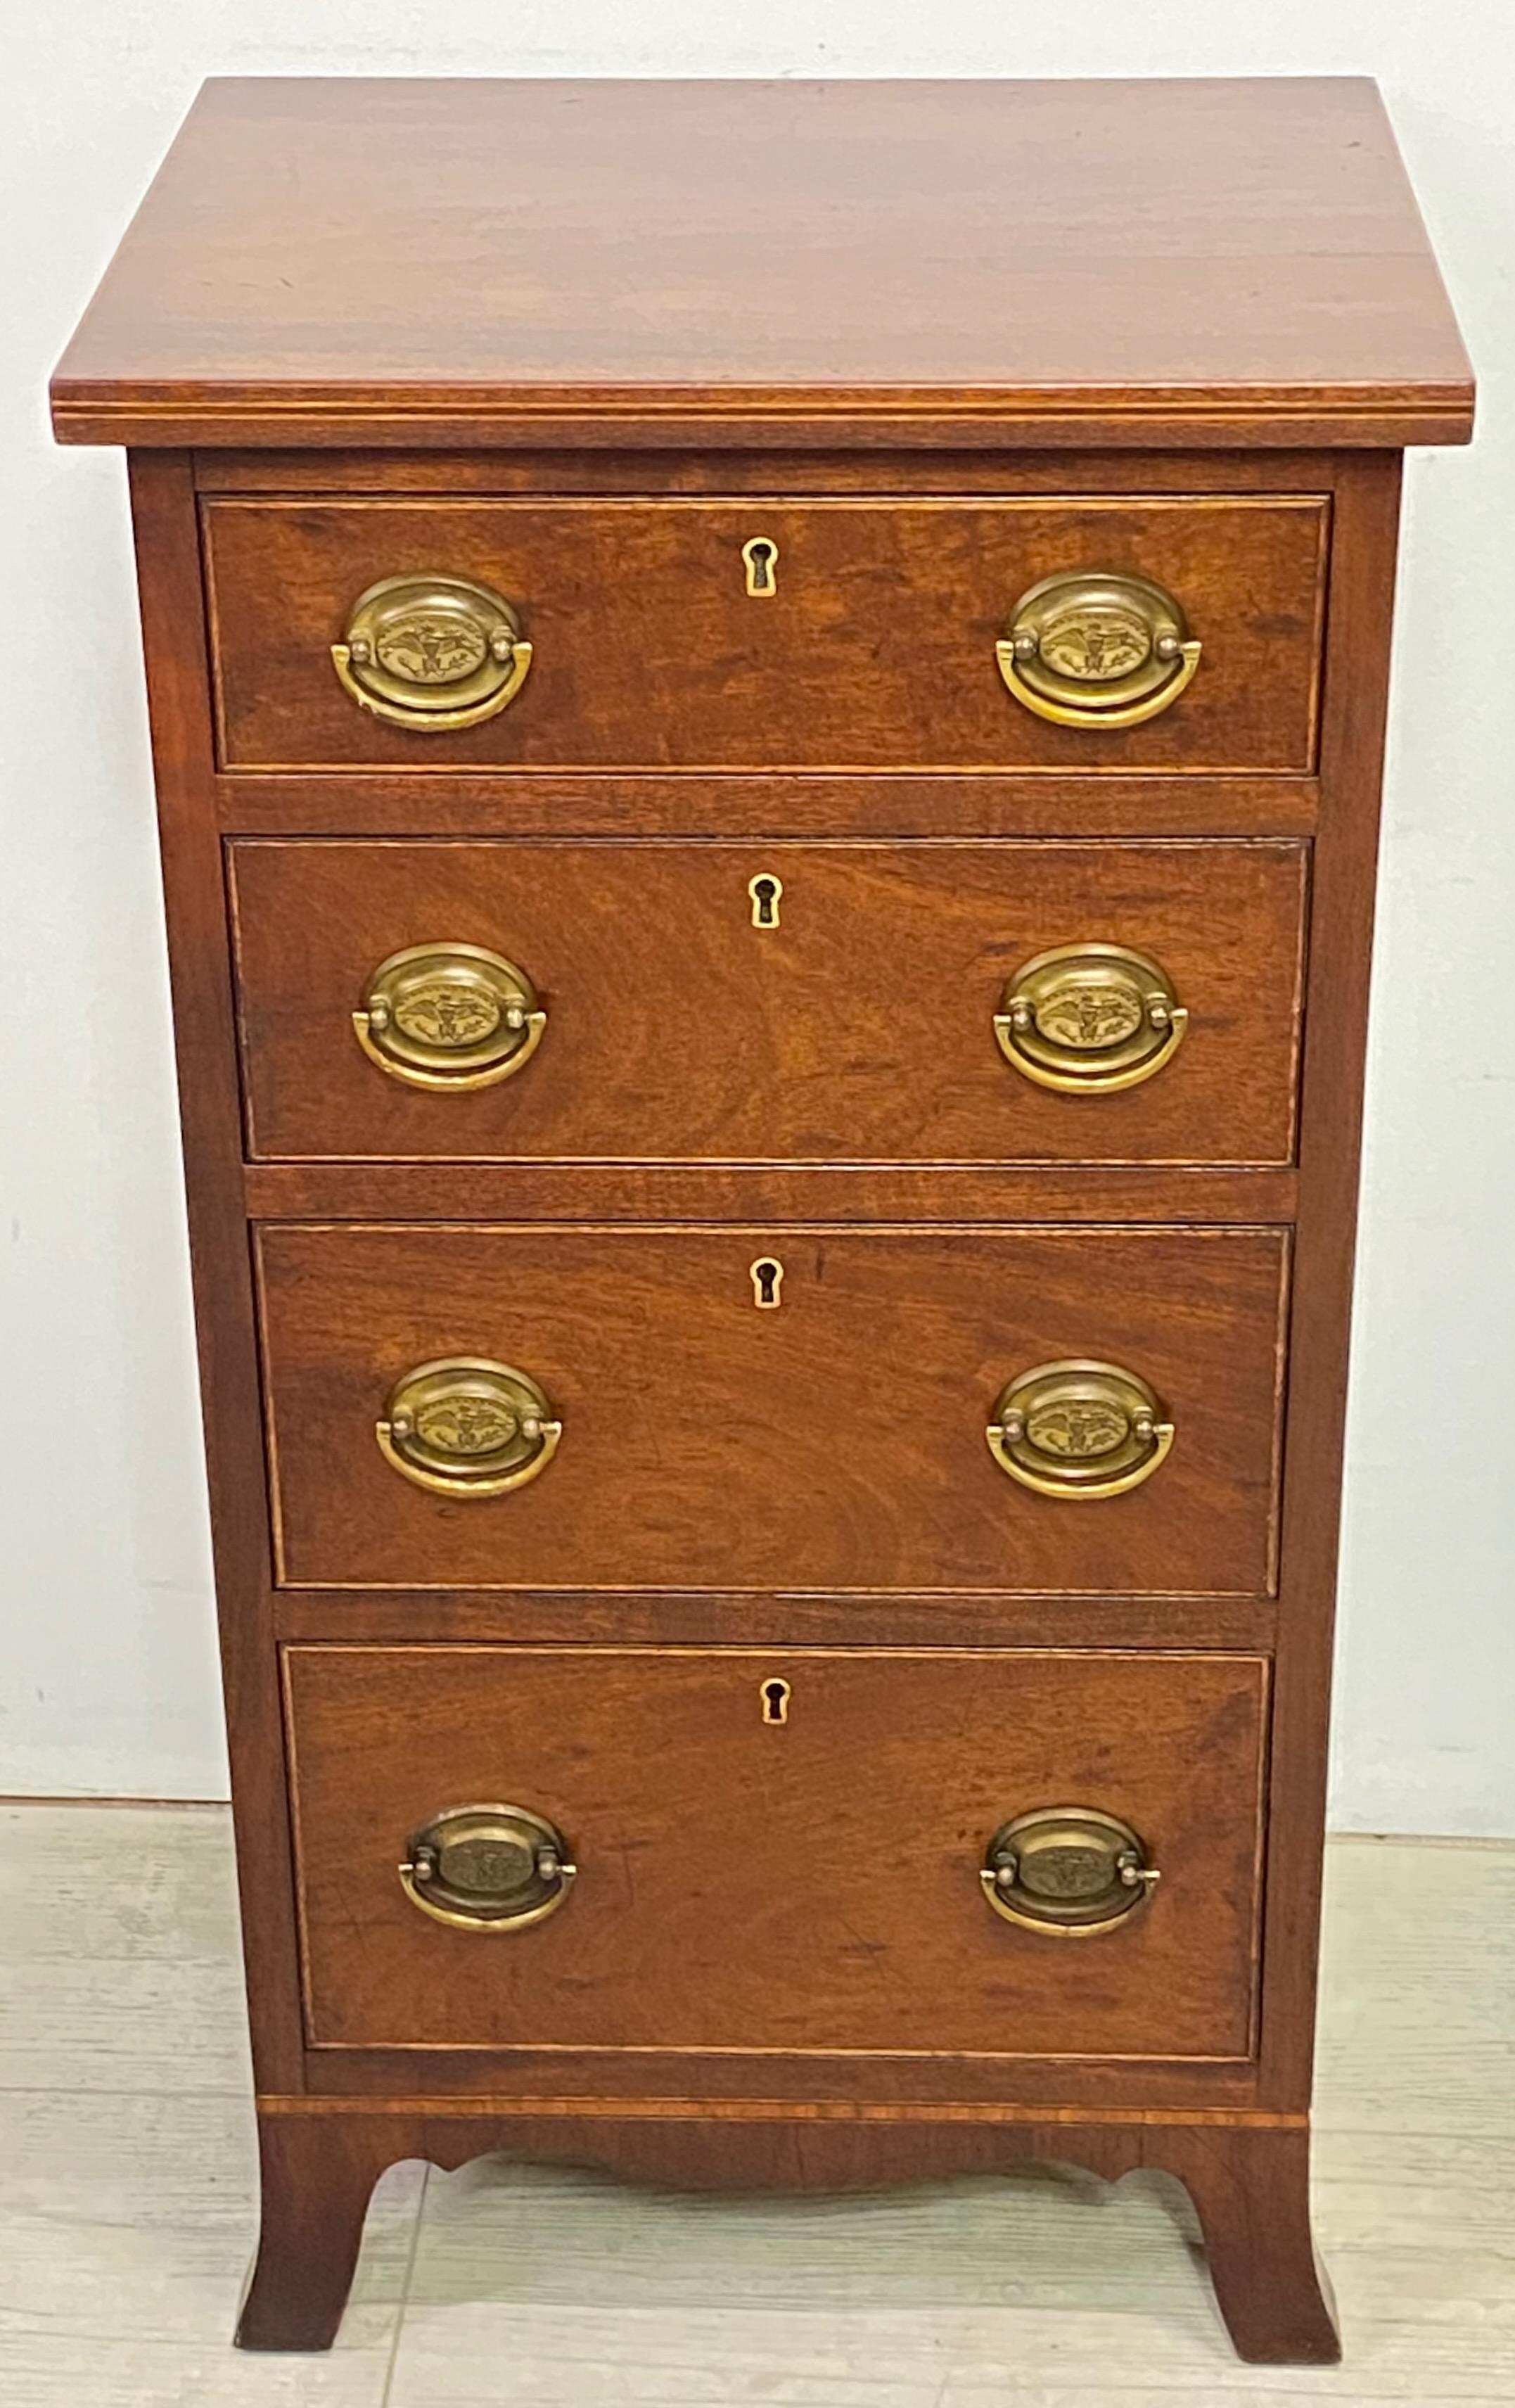 A unusual pair of Federal style mahogany small bedside cabinets or chest of drawers.
In remarkable original condition with original finish and hardware. 
Quality bench made craftsmanship, in excellent condition.
American, mid to late 19th century.